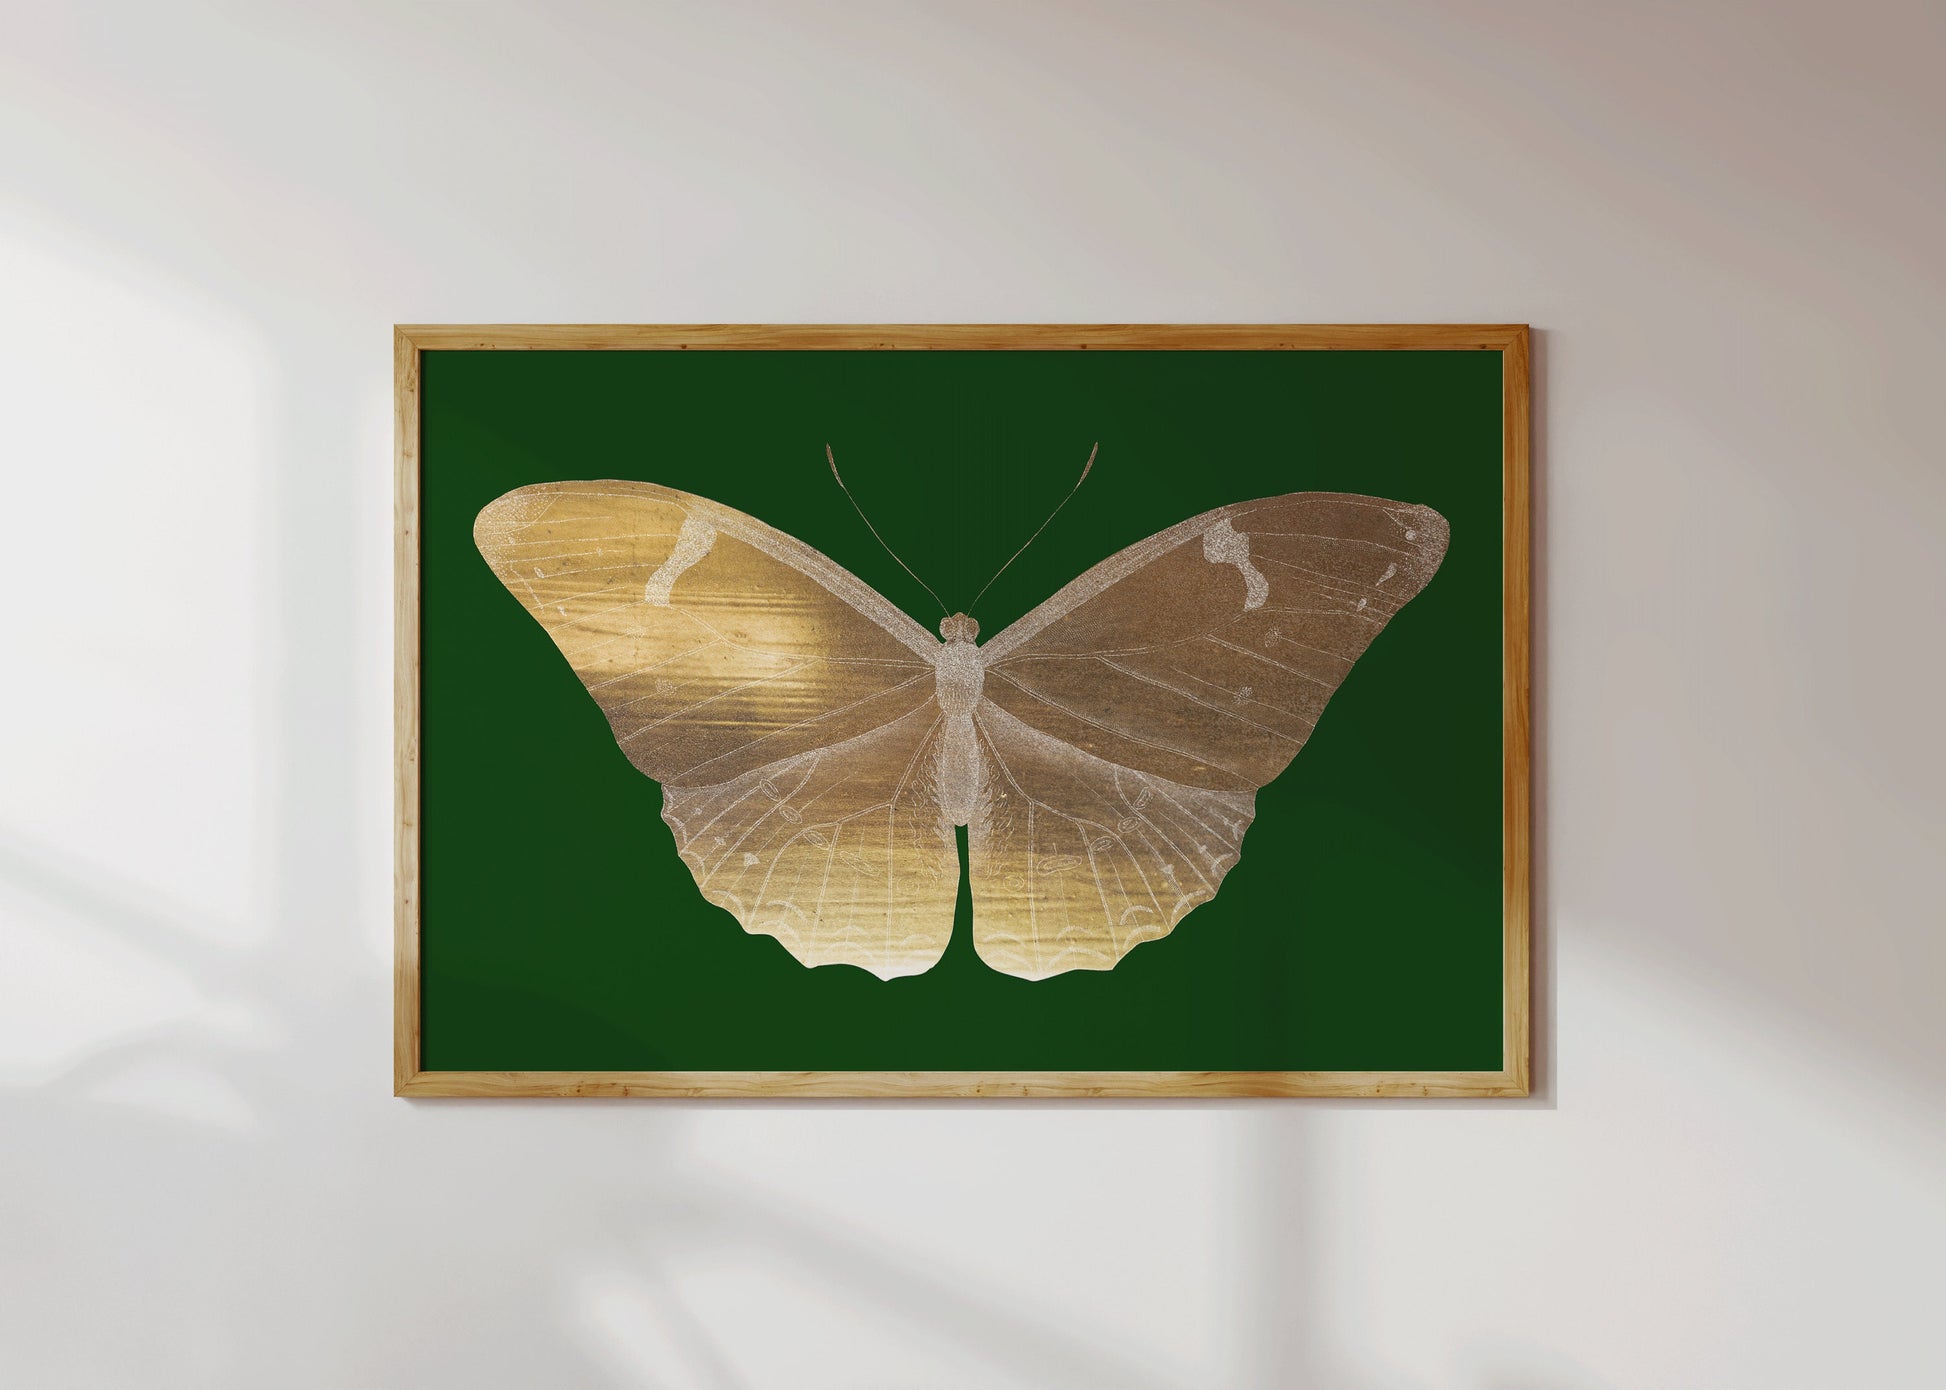 Set of 2 Vintage Gold Butterfly Art Print Emerald Green Dark Academia Style Aesthetic Art Print Home Office Decor Ready to hang Framed Gift